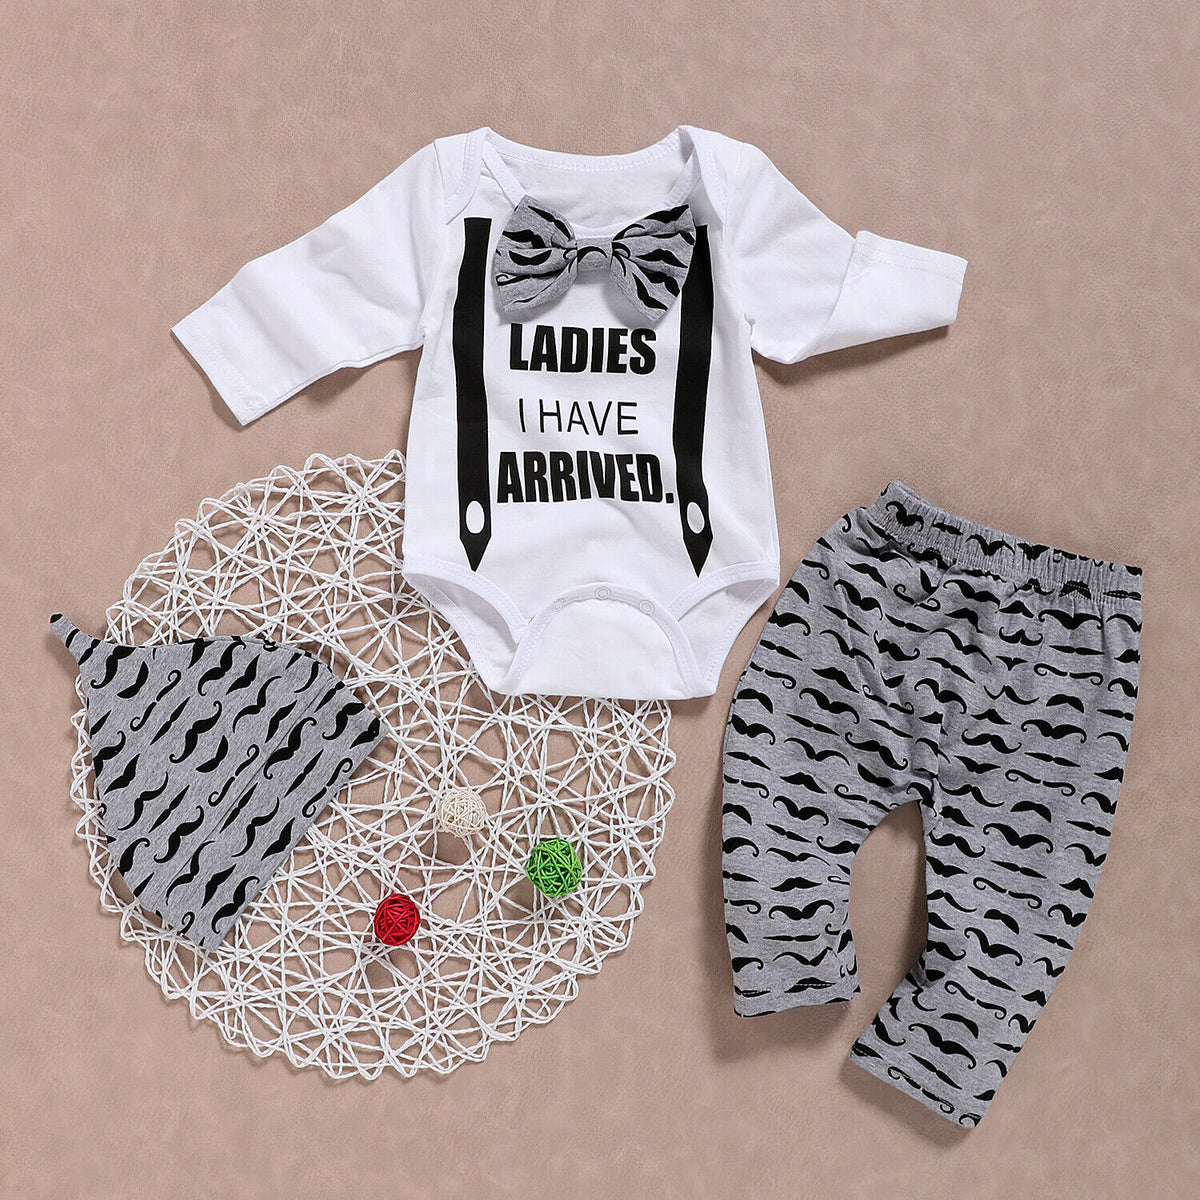 Baby Boy Coming Home Outfit - Ladies i have arrived Romper, Pants & Hat